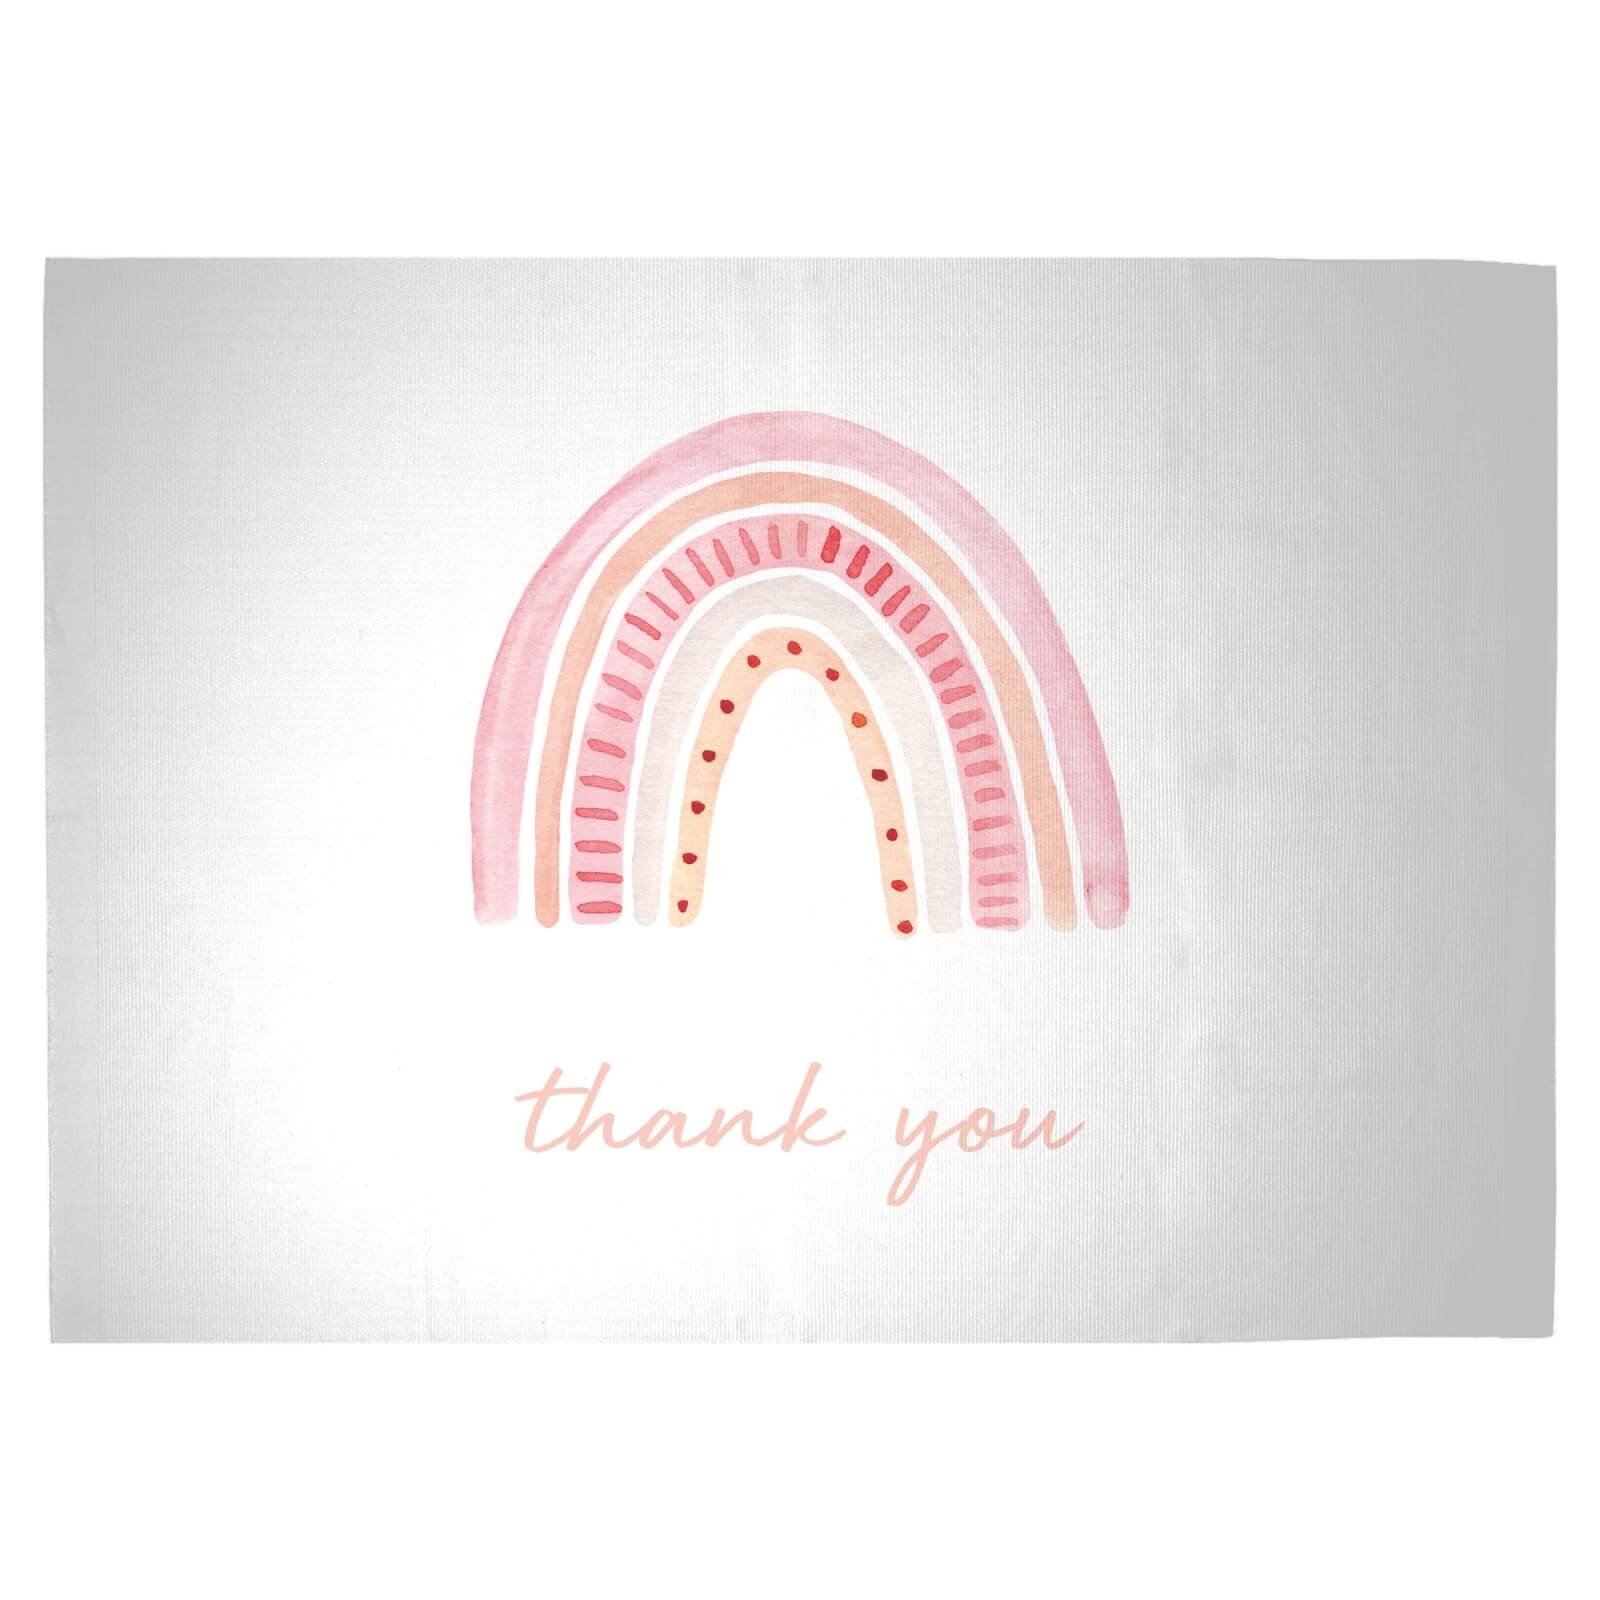 Thank You Pink Rainbow Woven Rug - Large